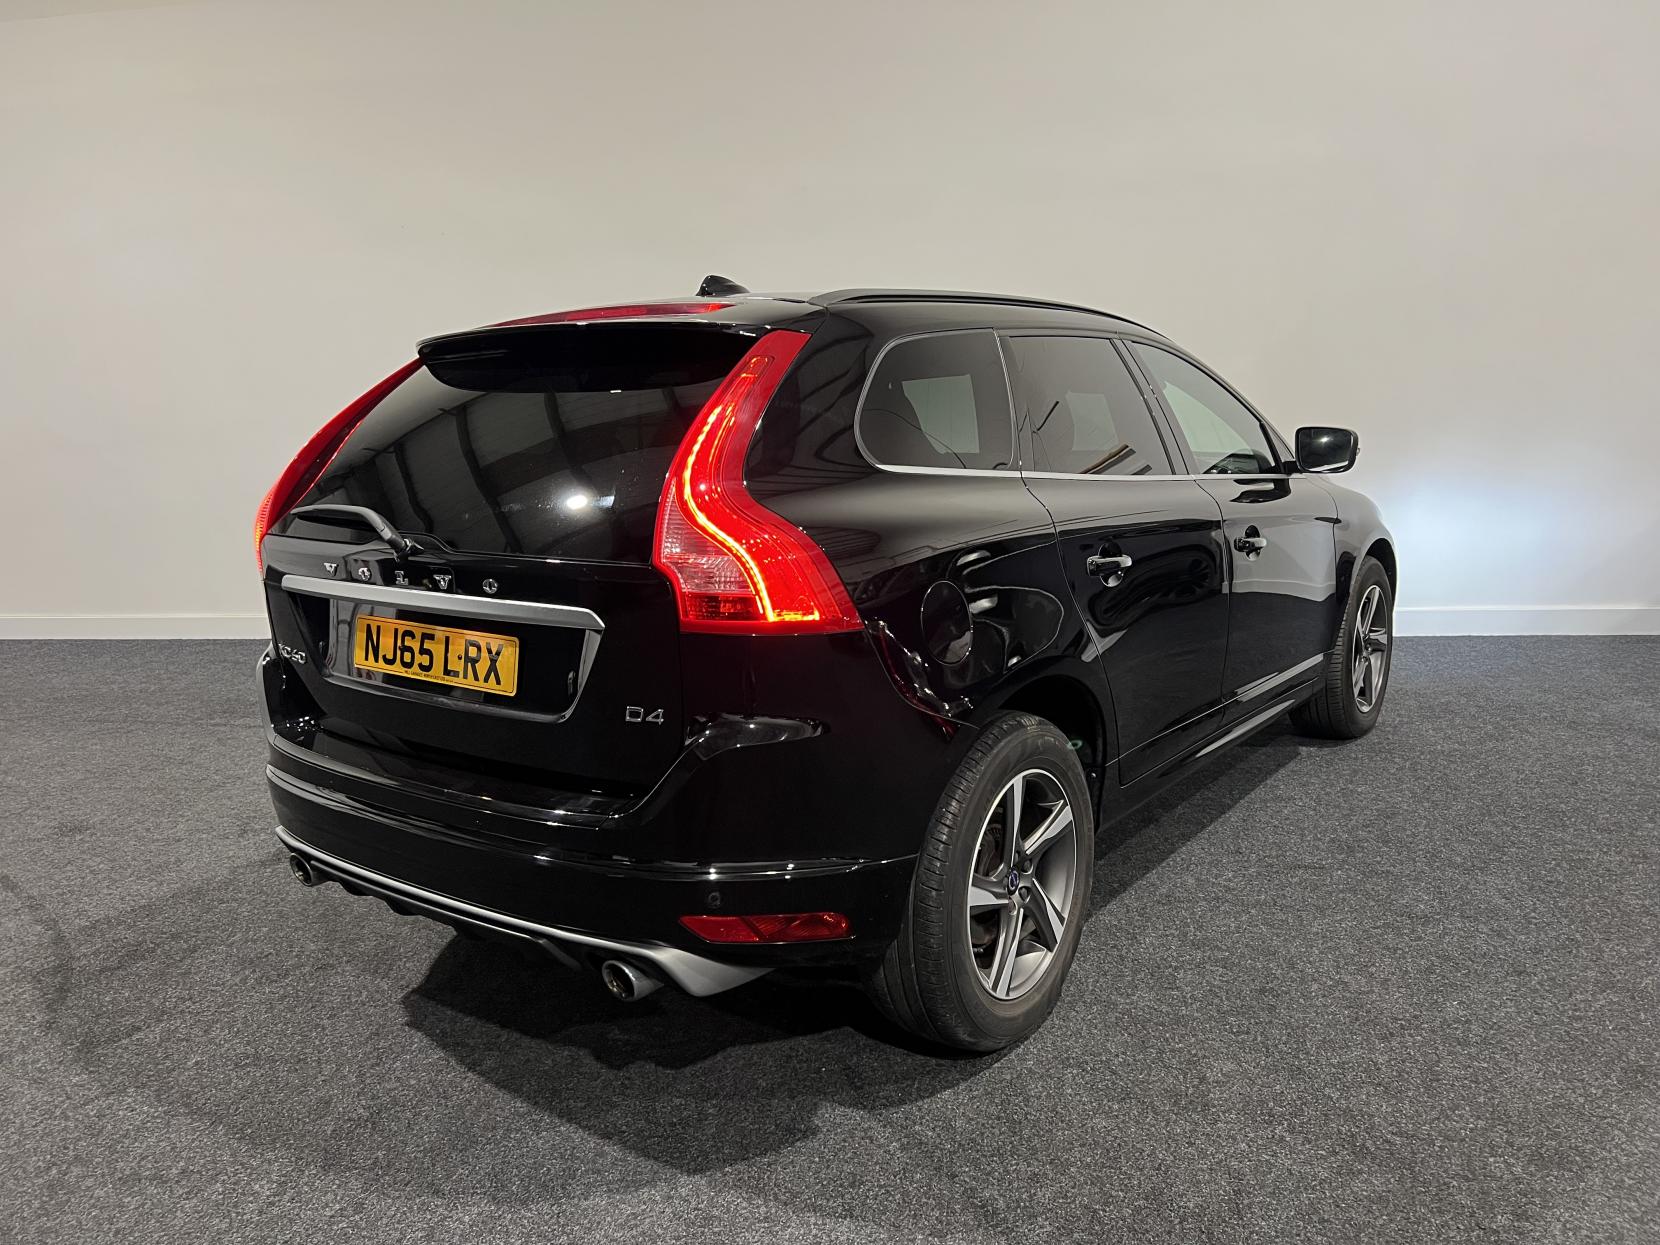 Volvo XC60 2.0 D4 R-Design SUV 5dr Diesel Manual Euro 6 (s/s) (190 ps)